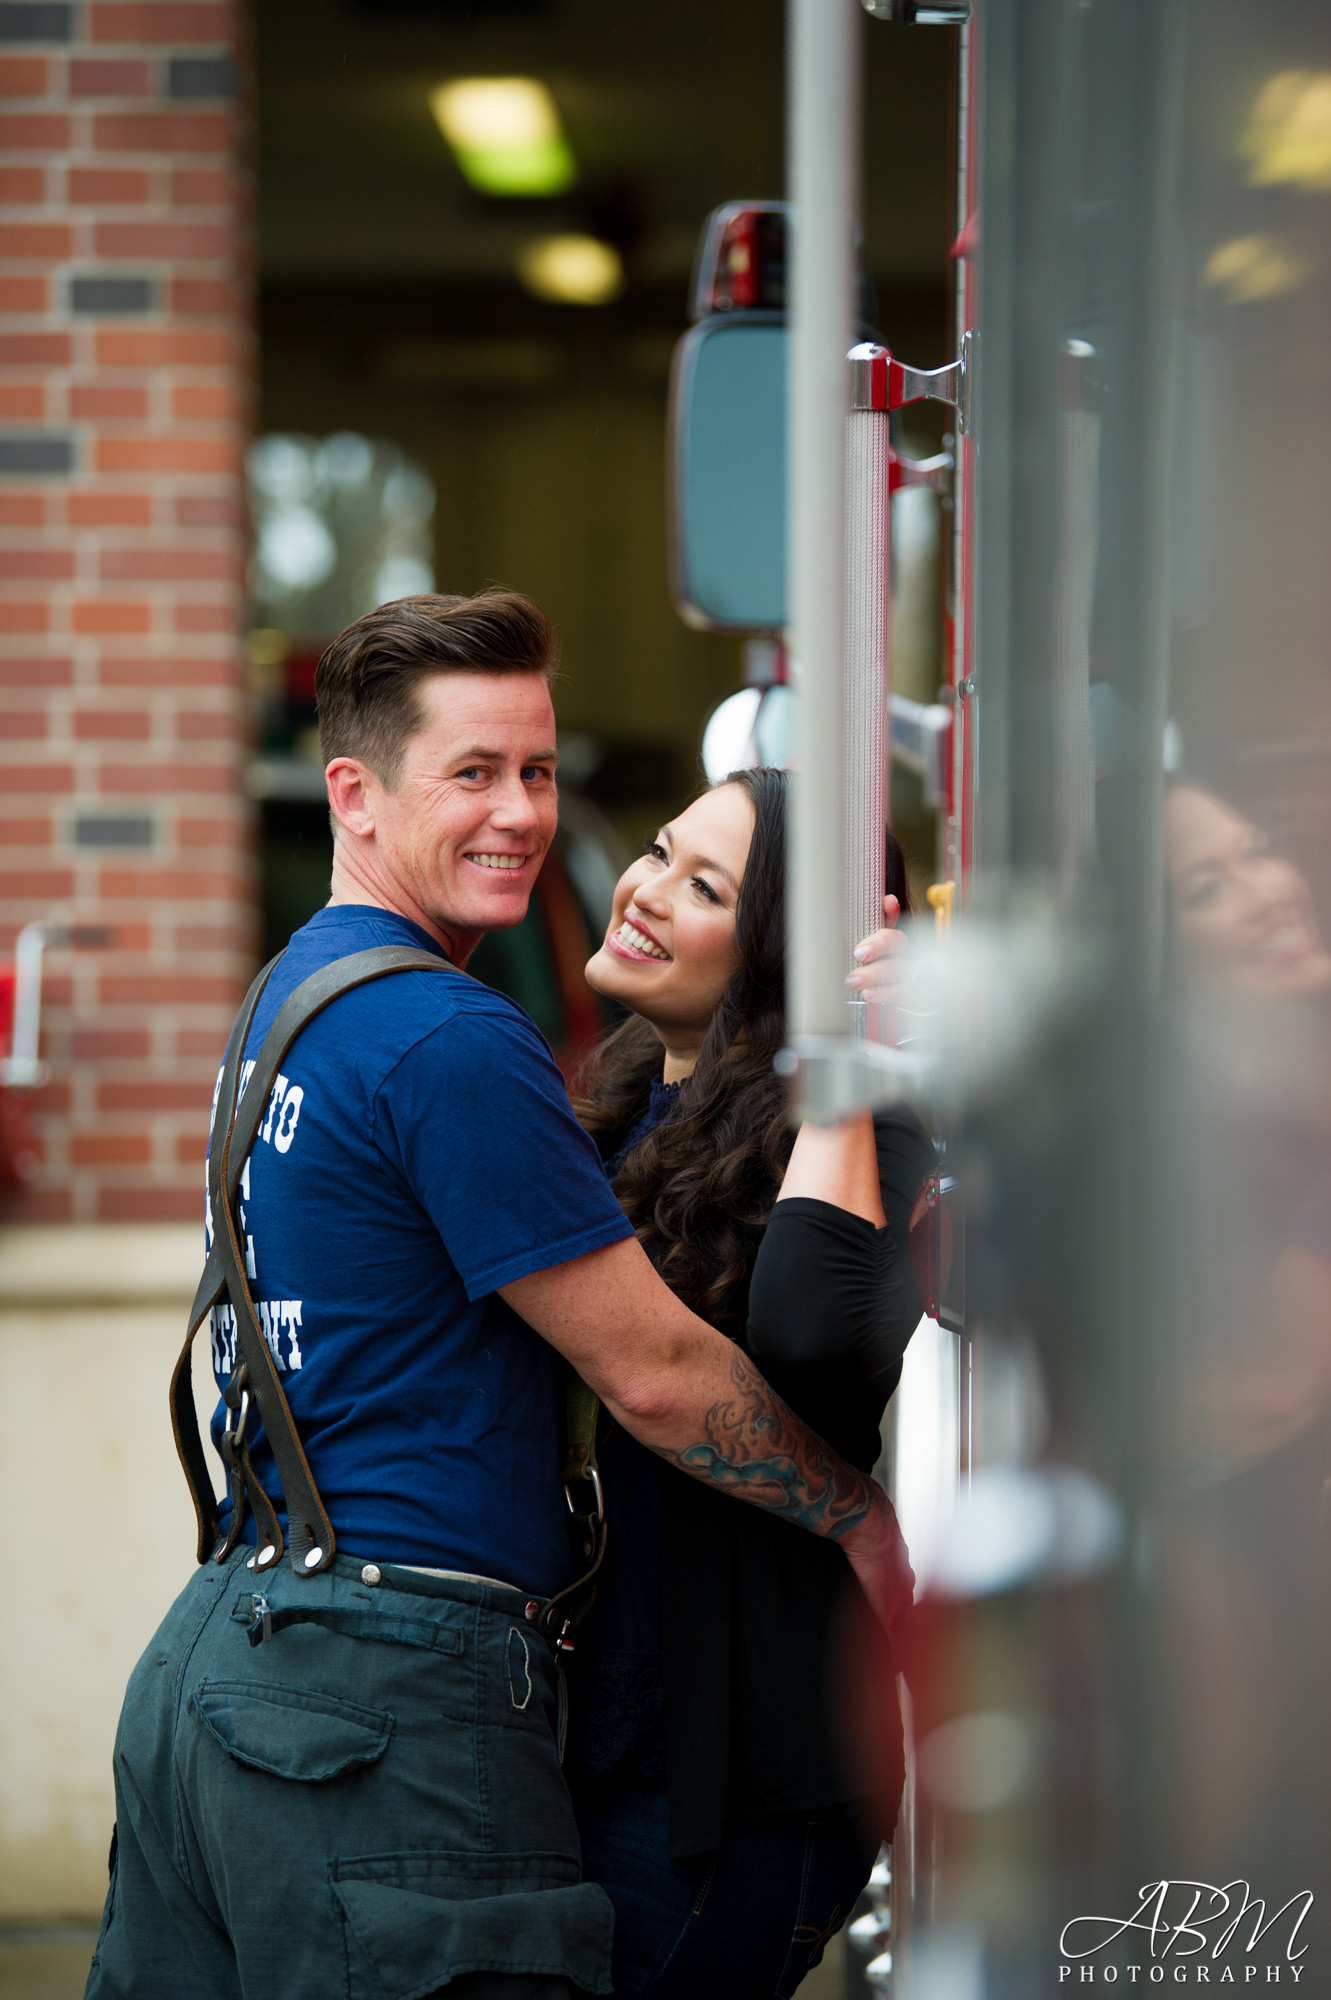 sacromento-fire-station-engagement-san-diego-wedding-photography-0010-1 Fire Station 5 | State Capital | Sacramento | Chalyn + Jen’s Engagement Photography